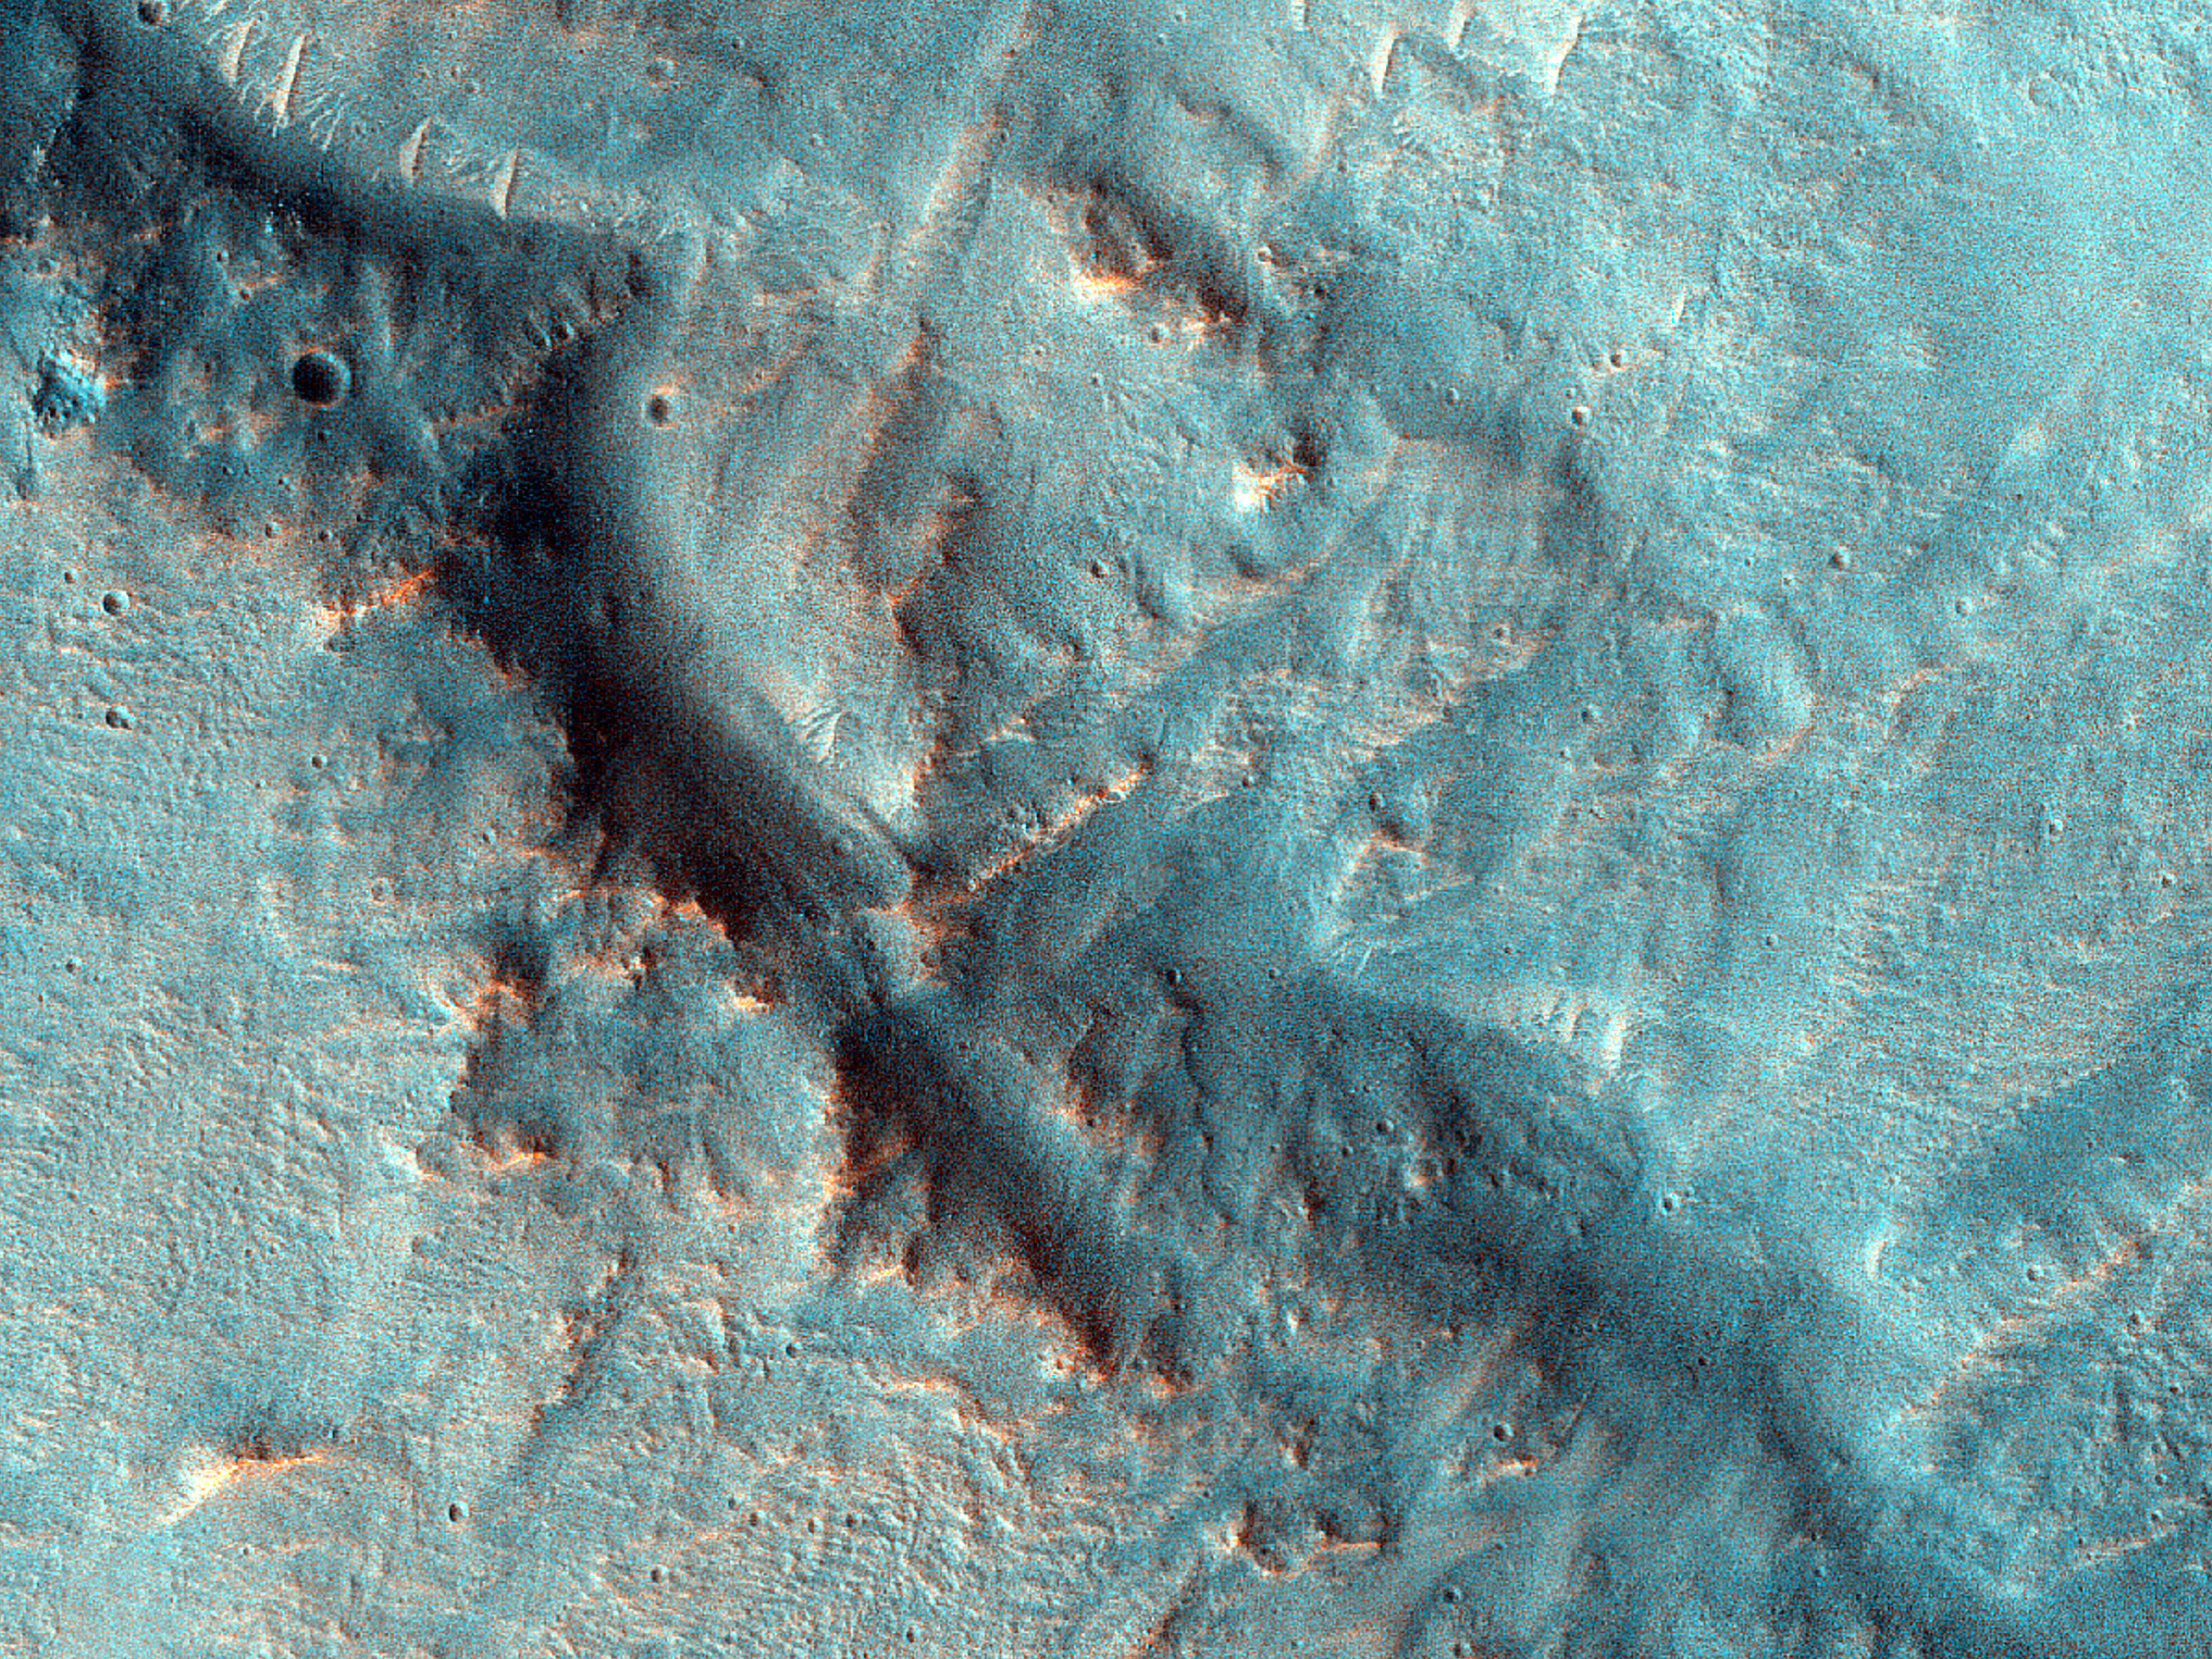 Impact-Related Deposits and Flows near Jijiga Crater